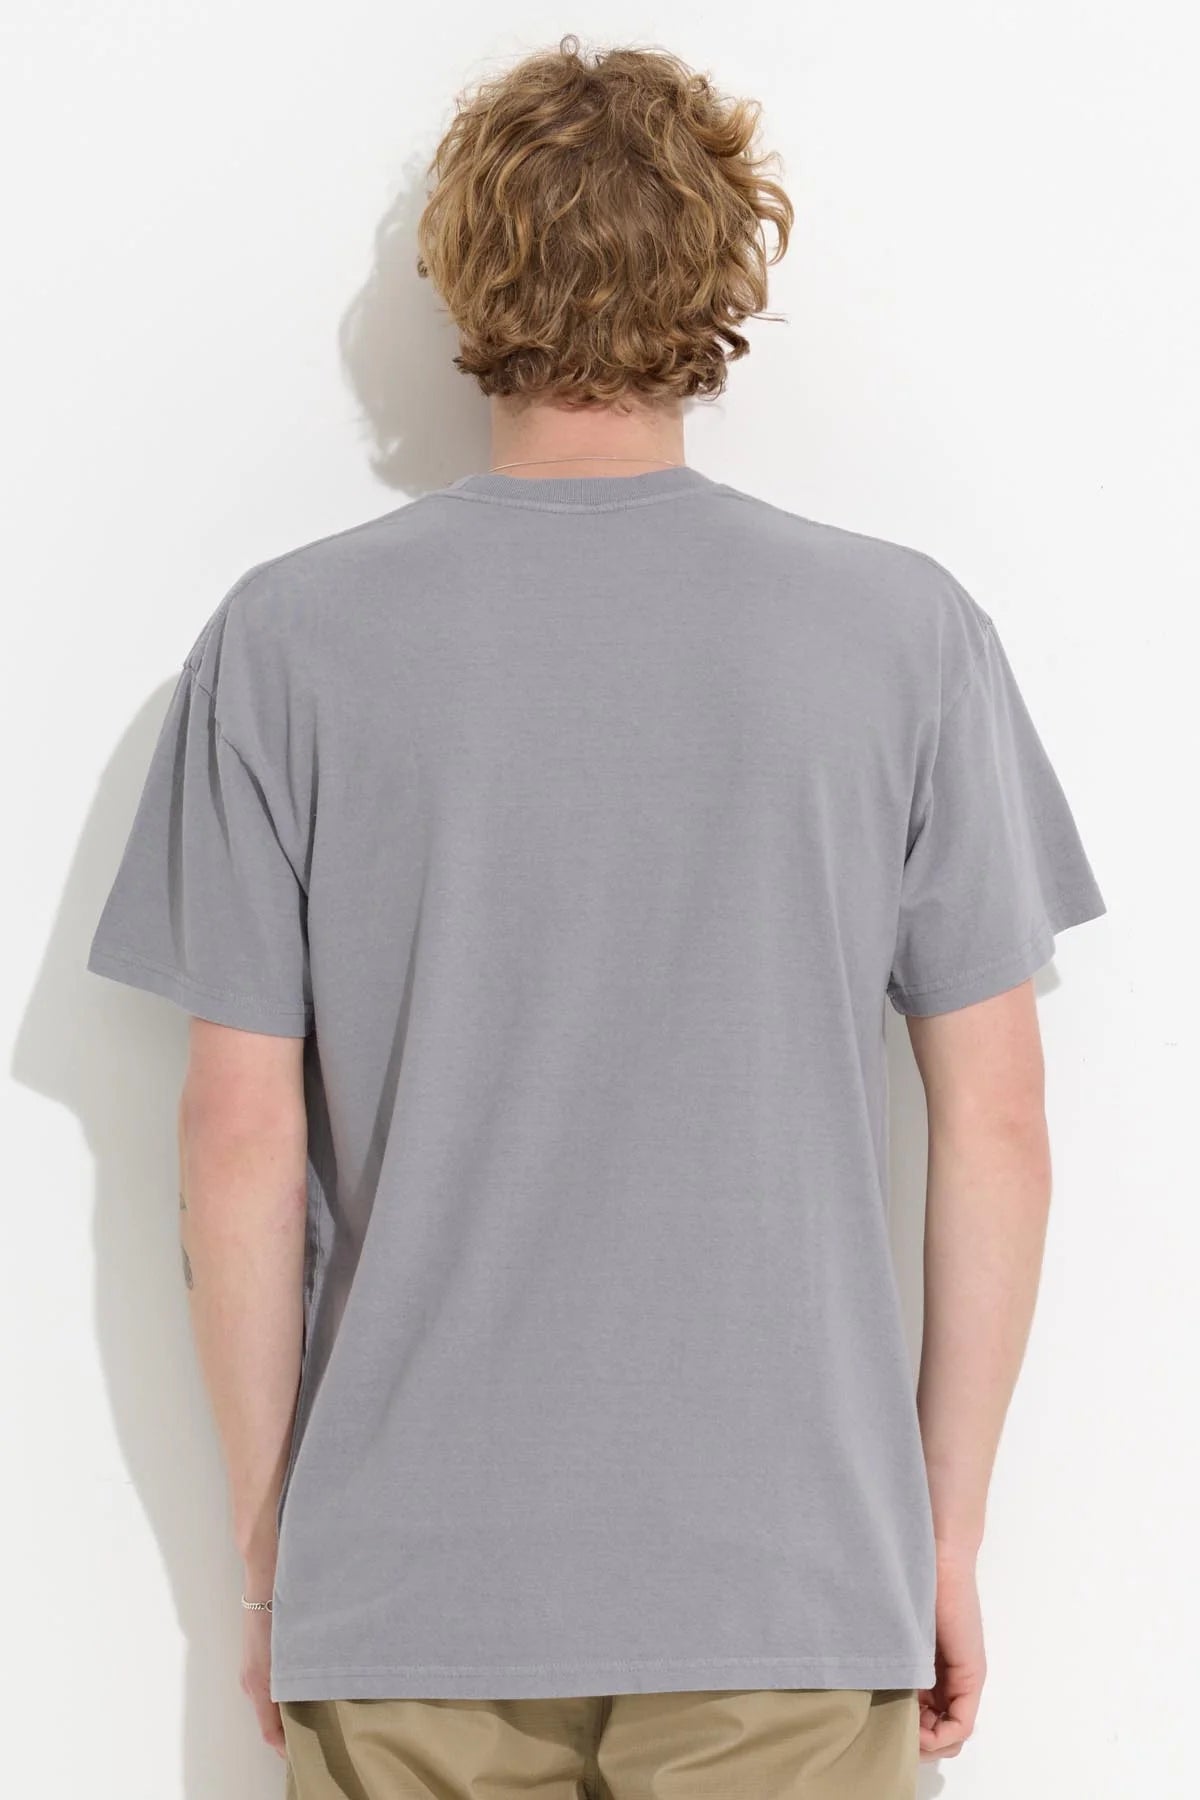 Special Feel SS Tee - Pigment Grey